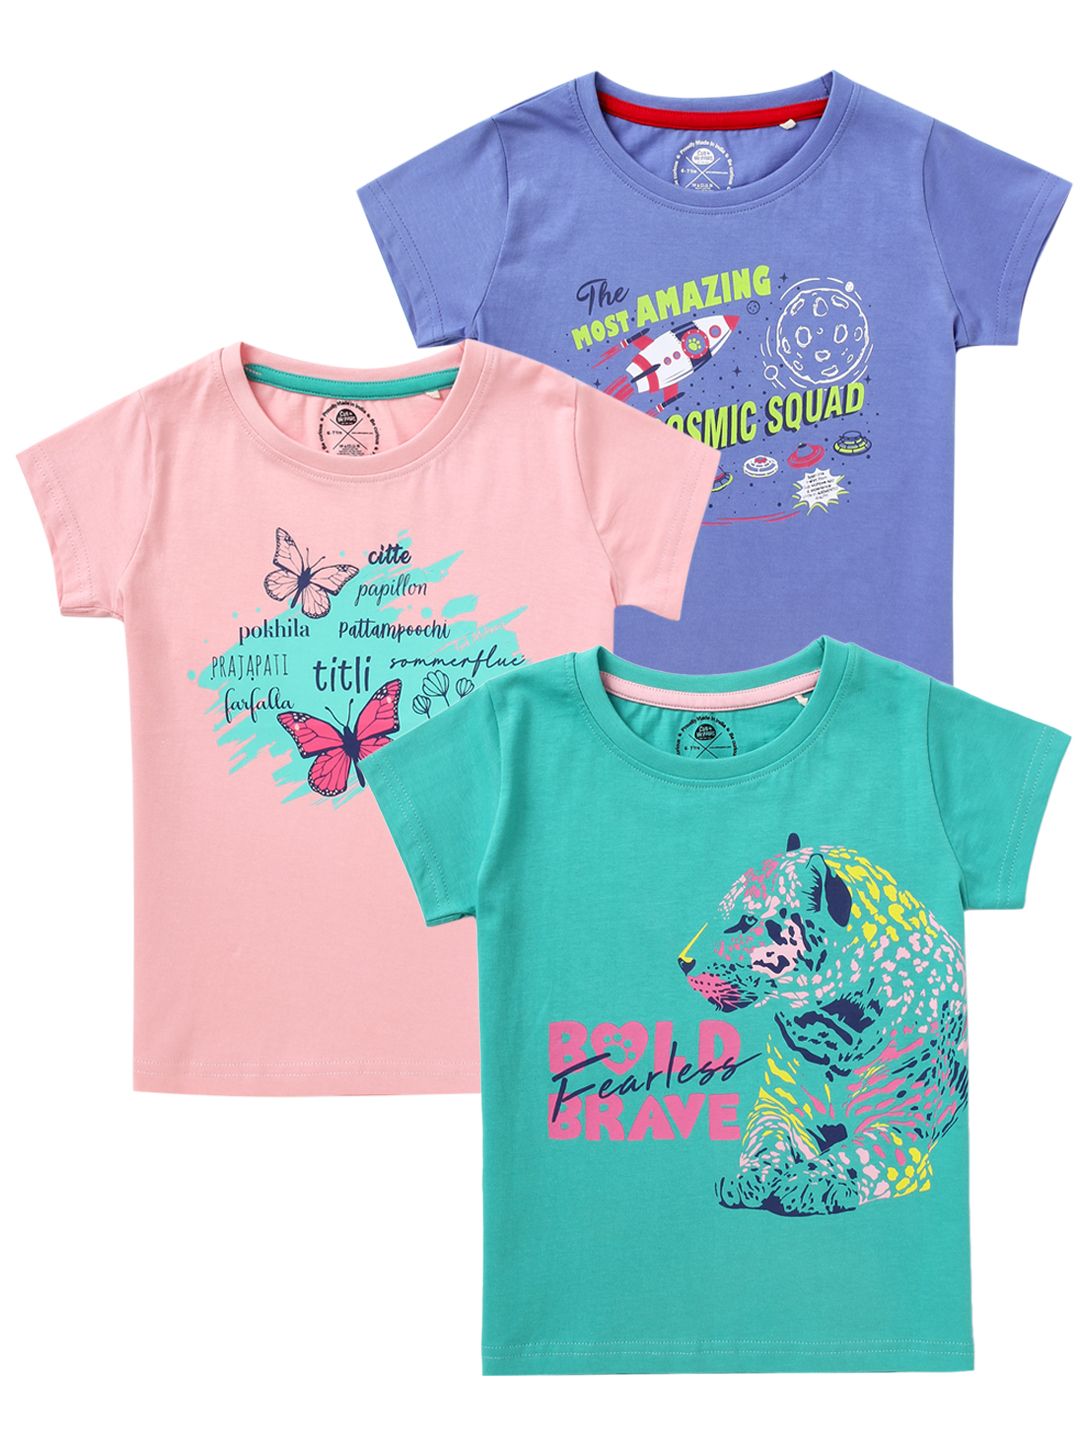 Girls Pack of 3 T-Shirts Half Sleeves,(includes 1 Magic T-shirt)